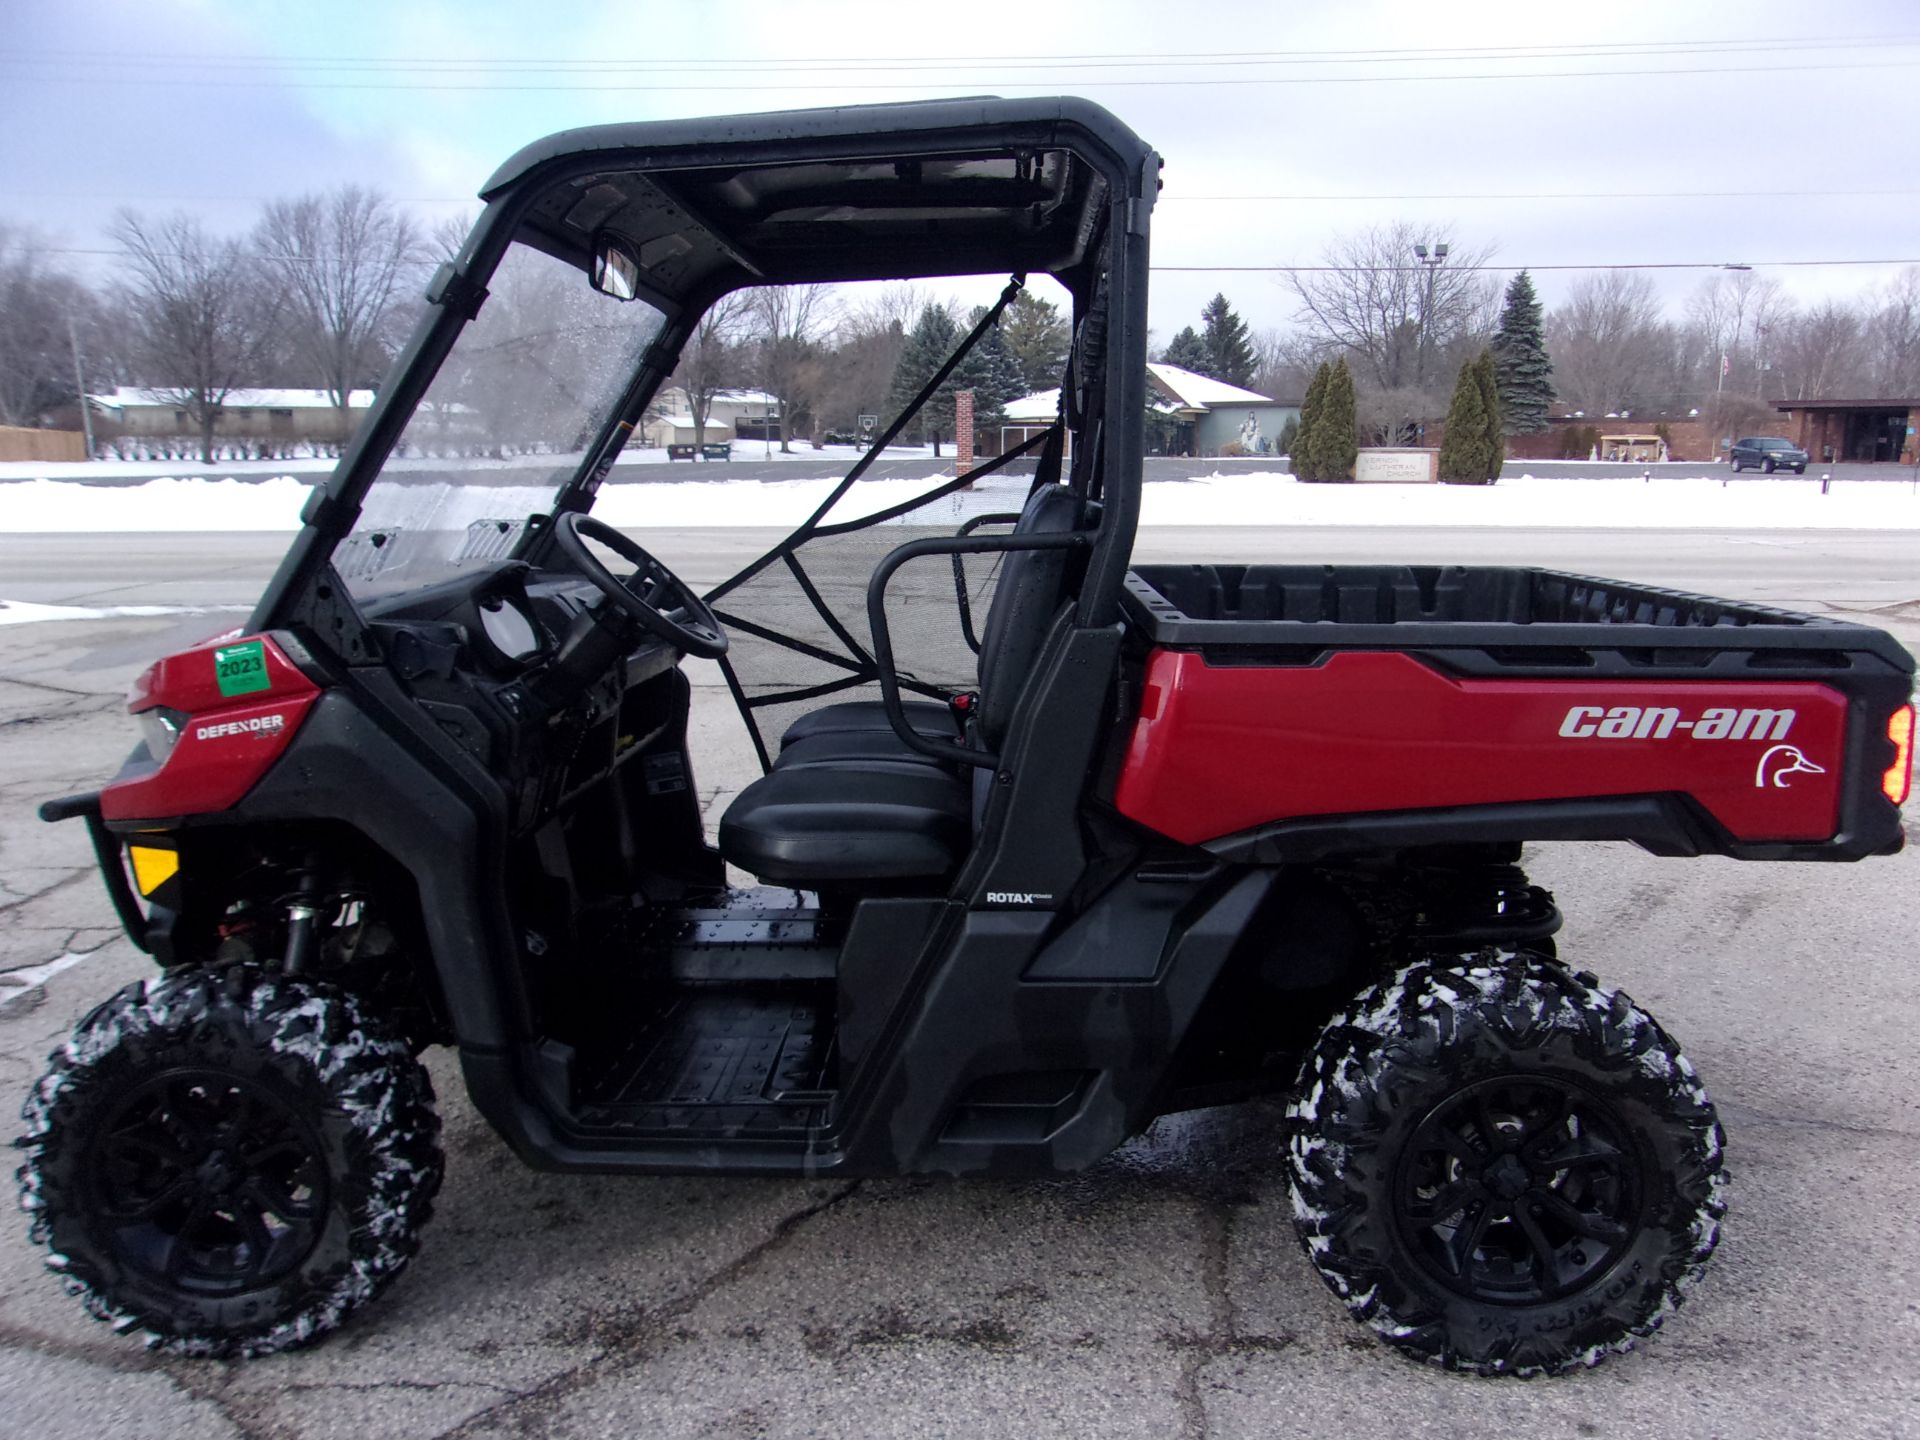 2016 Can-Am Defender XT HD10 in Mukwonago, Wisconsin - Photo 1